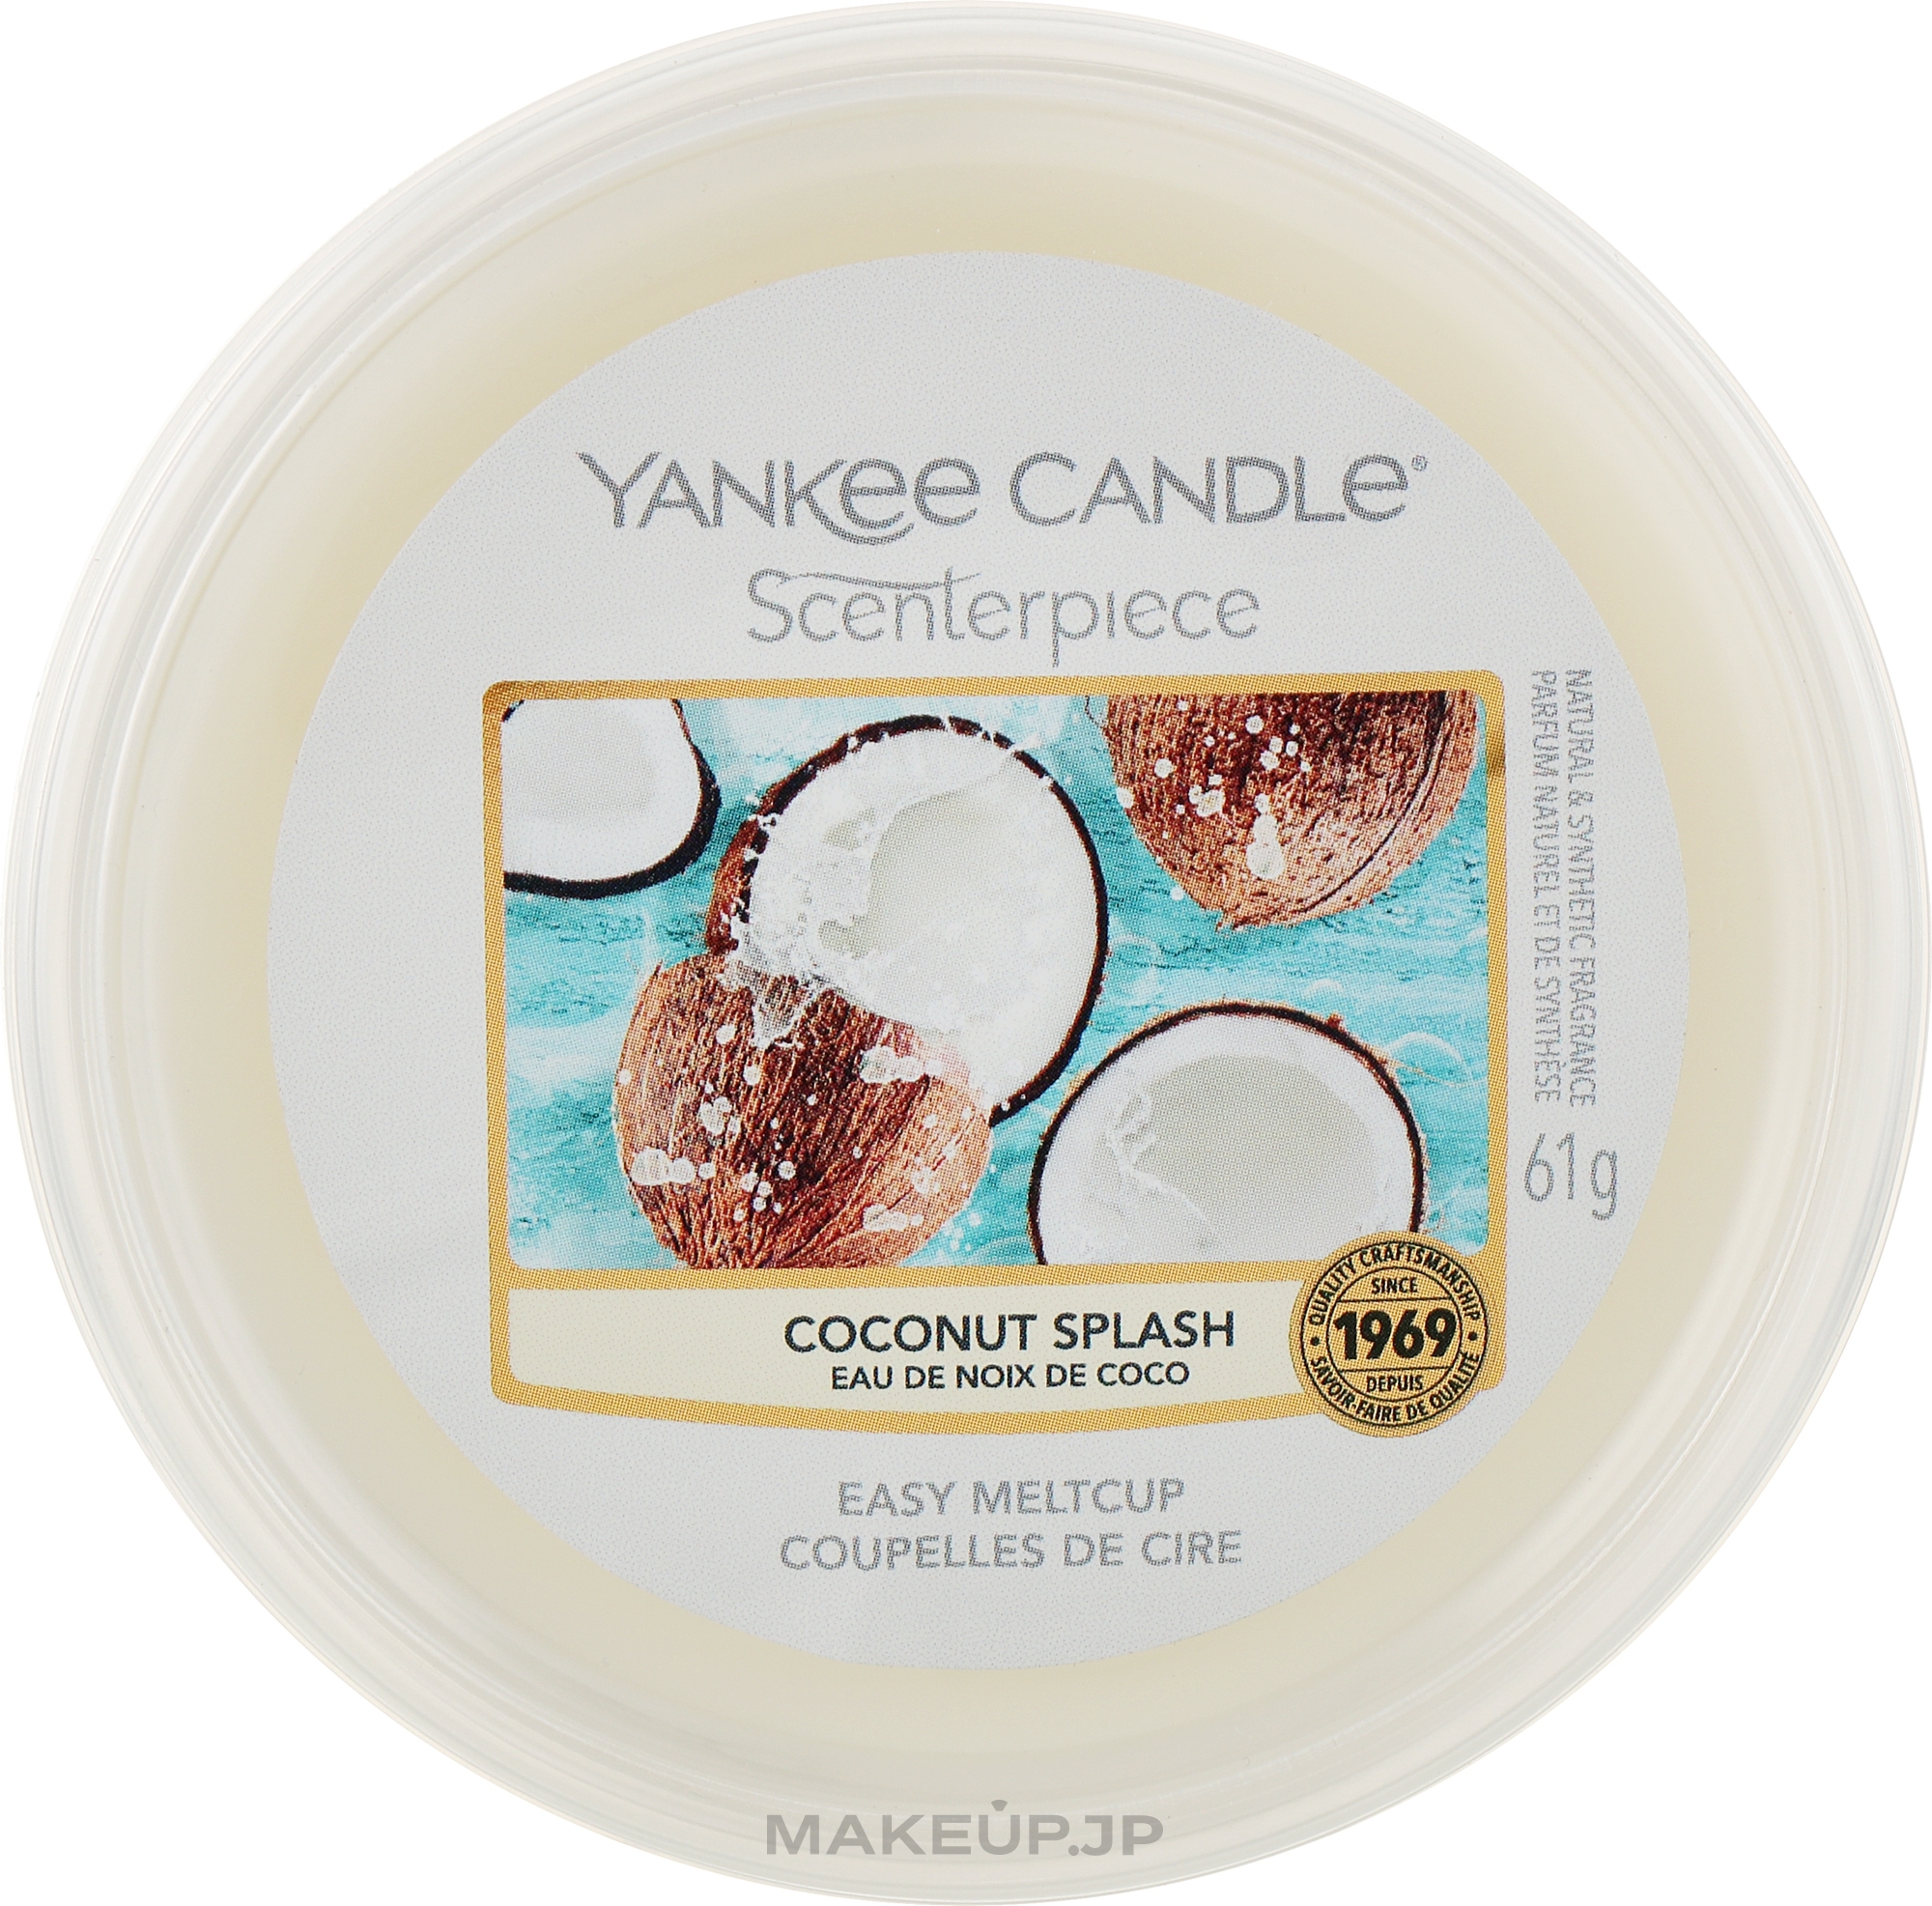 Scented Wax - Yankee Candle Coconut Splash Scenterpiece Melt Cup — photo 61 g